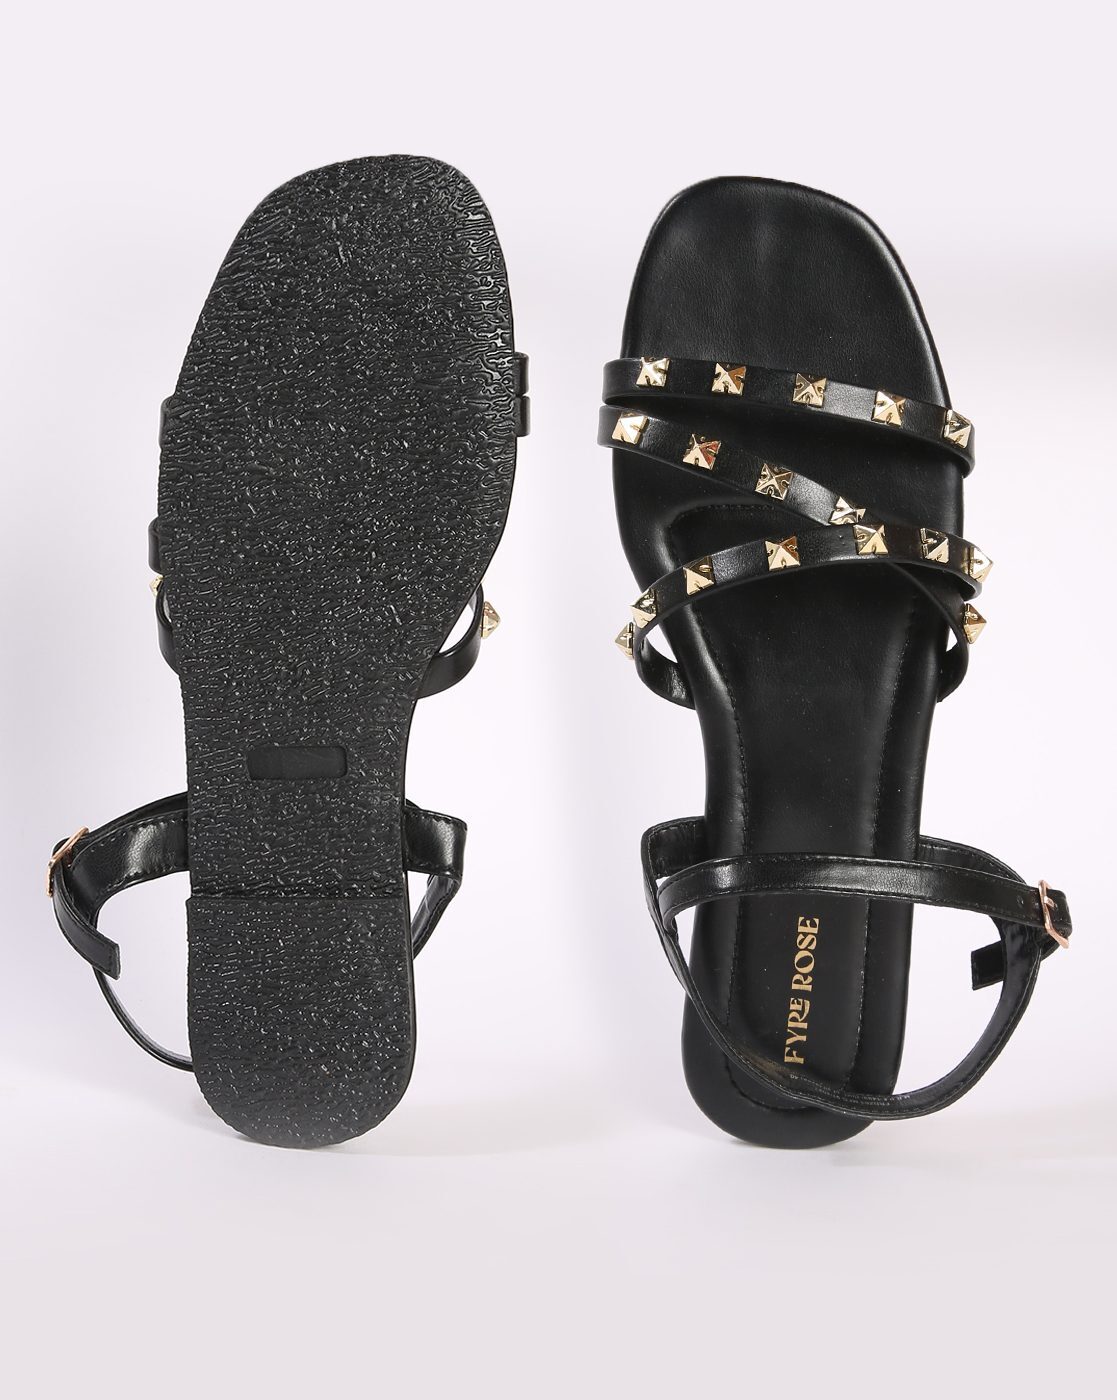 Hush Puppies Black Flat Sandals For Women F66464260000ED at Rs 4999/pair |  Ahmedabad | ID: 17789955962